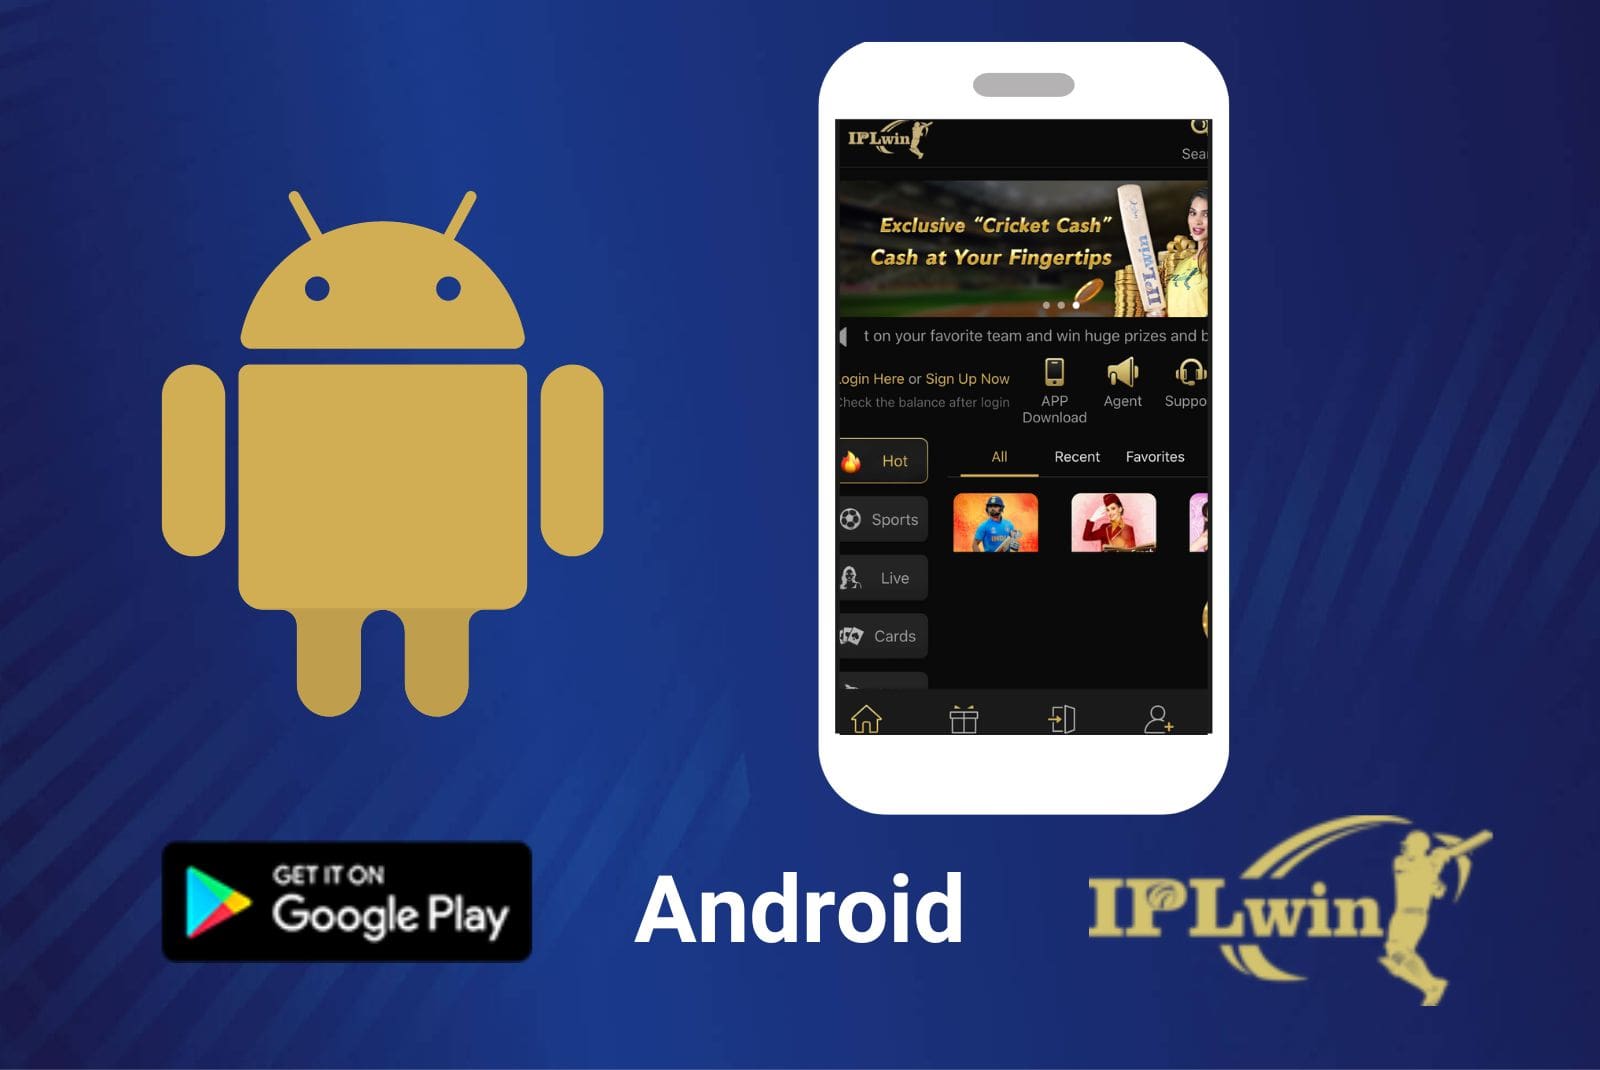 Sports betting and gambling games at IPLwin Android application